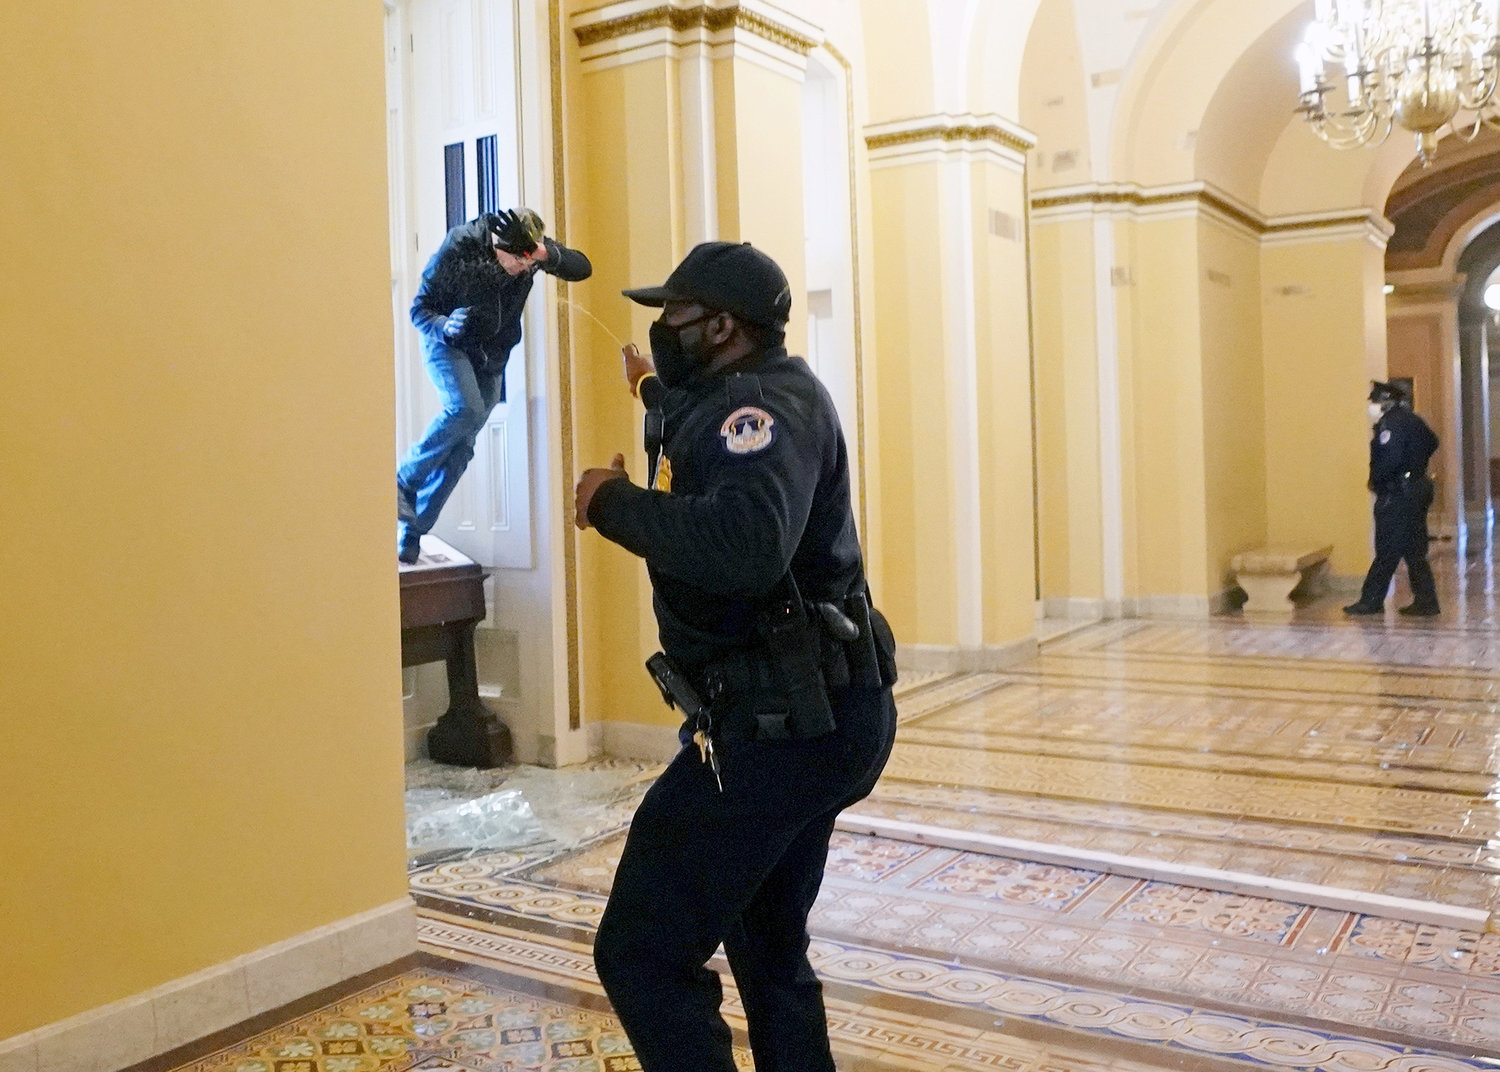 BREAKING IN—A Capitol police officer shoots pepper spray at a protester attempting to breach the U.S. Capitol building through a window during a joint session of Congress to certify the 2020 election results on Capitol Hill in Washington Jan. 6.